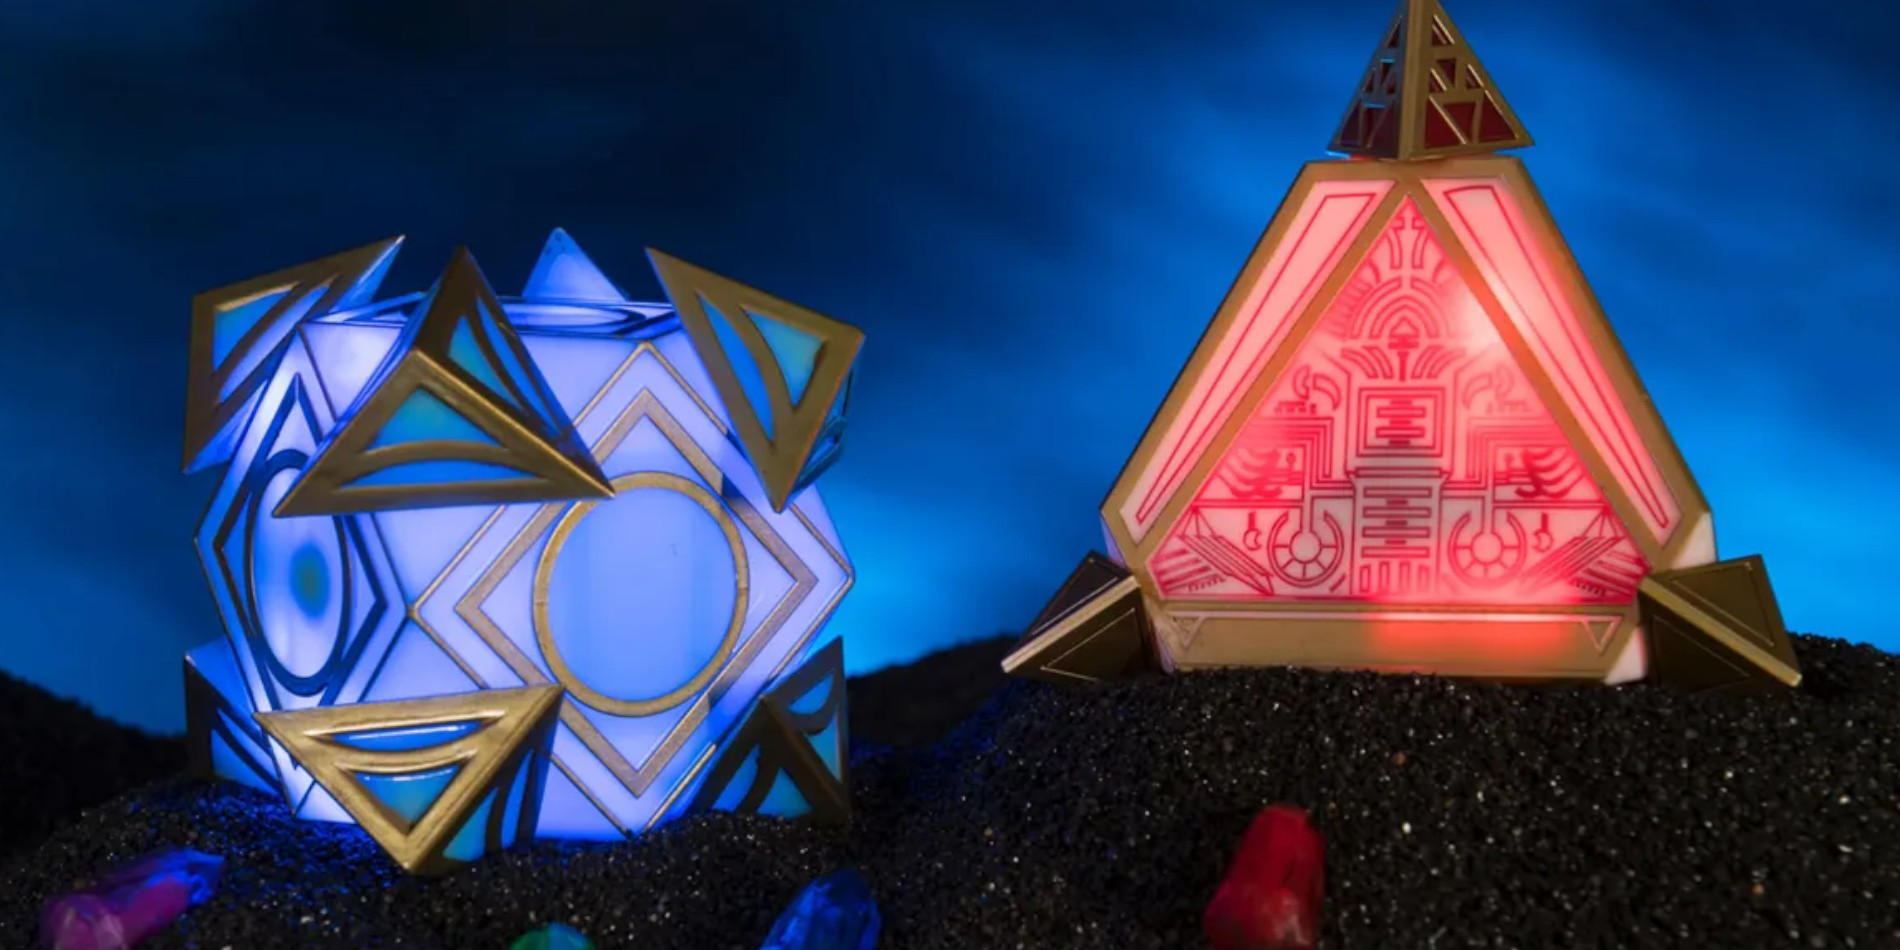 The Jedi and Sith Holocrons on sale at Galaxy's Edge